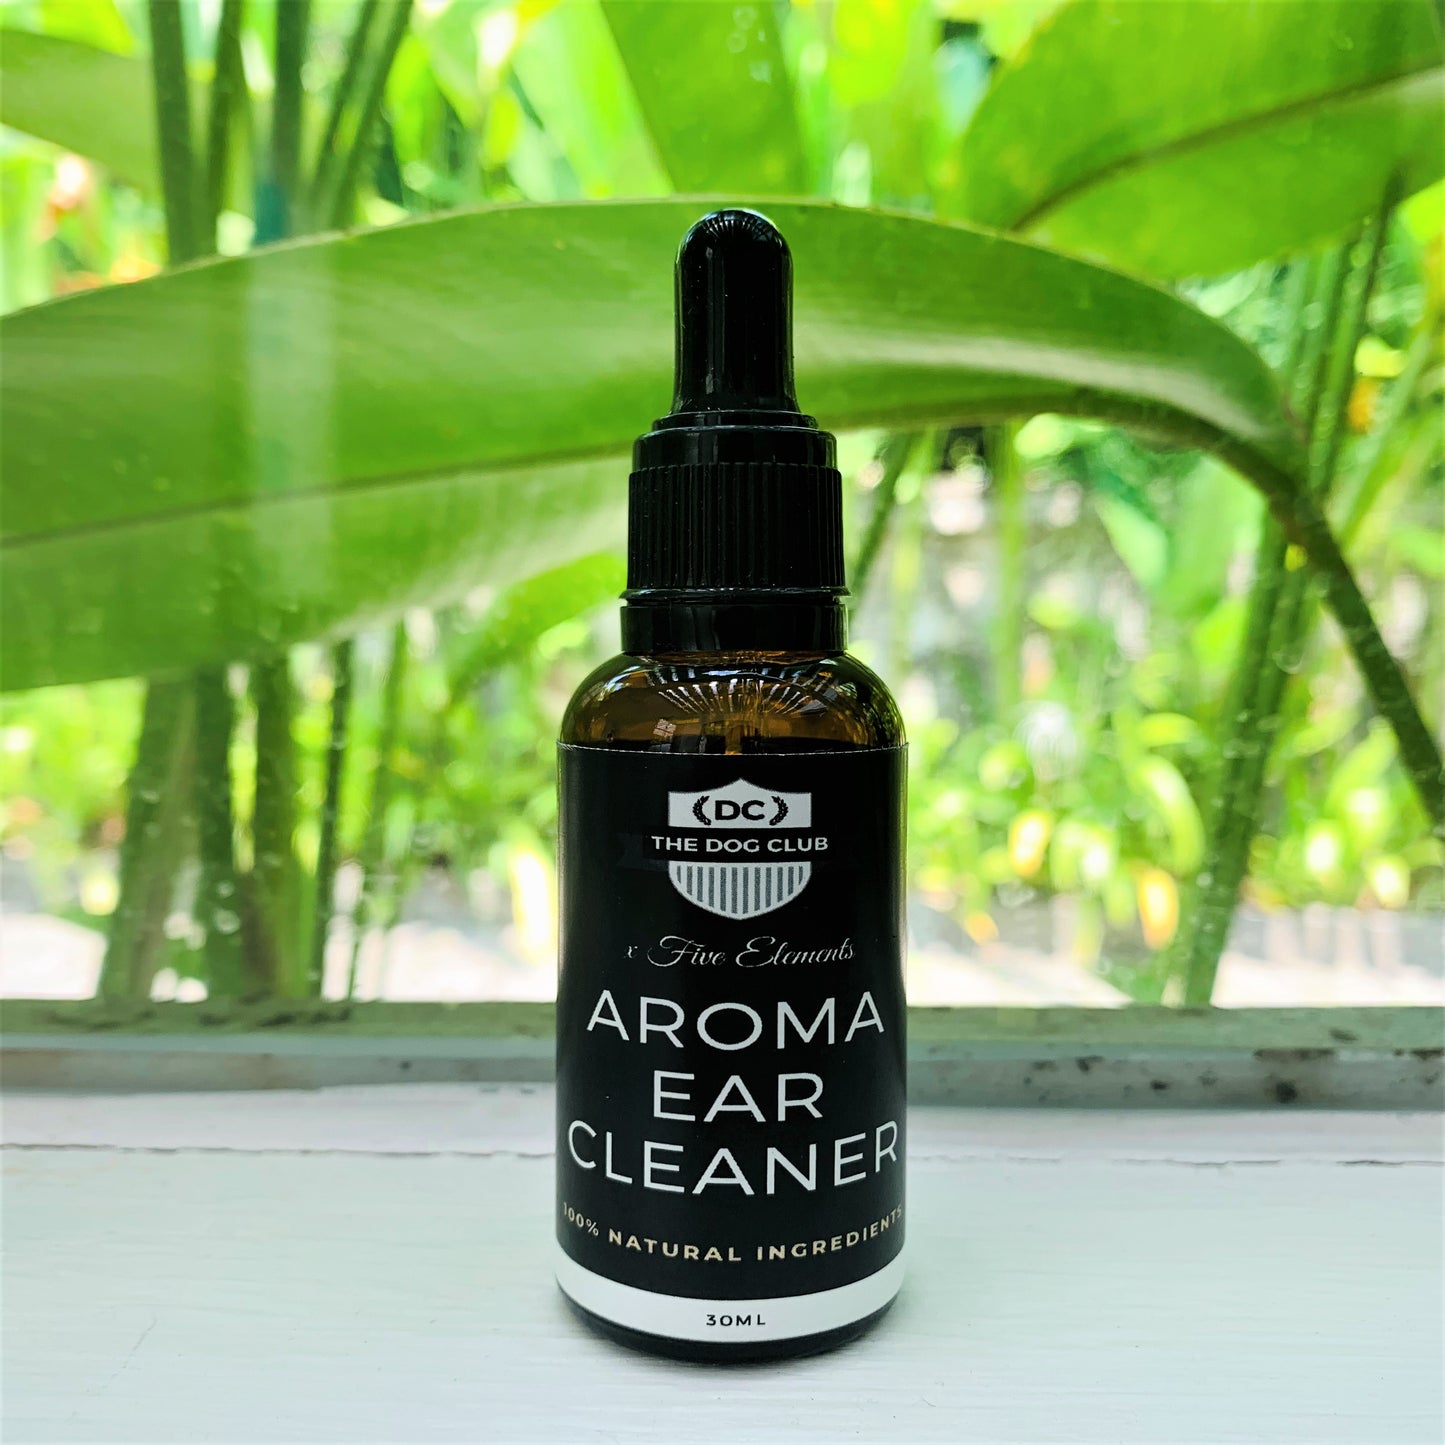 Aroma Ear Cleaner